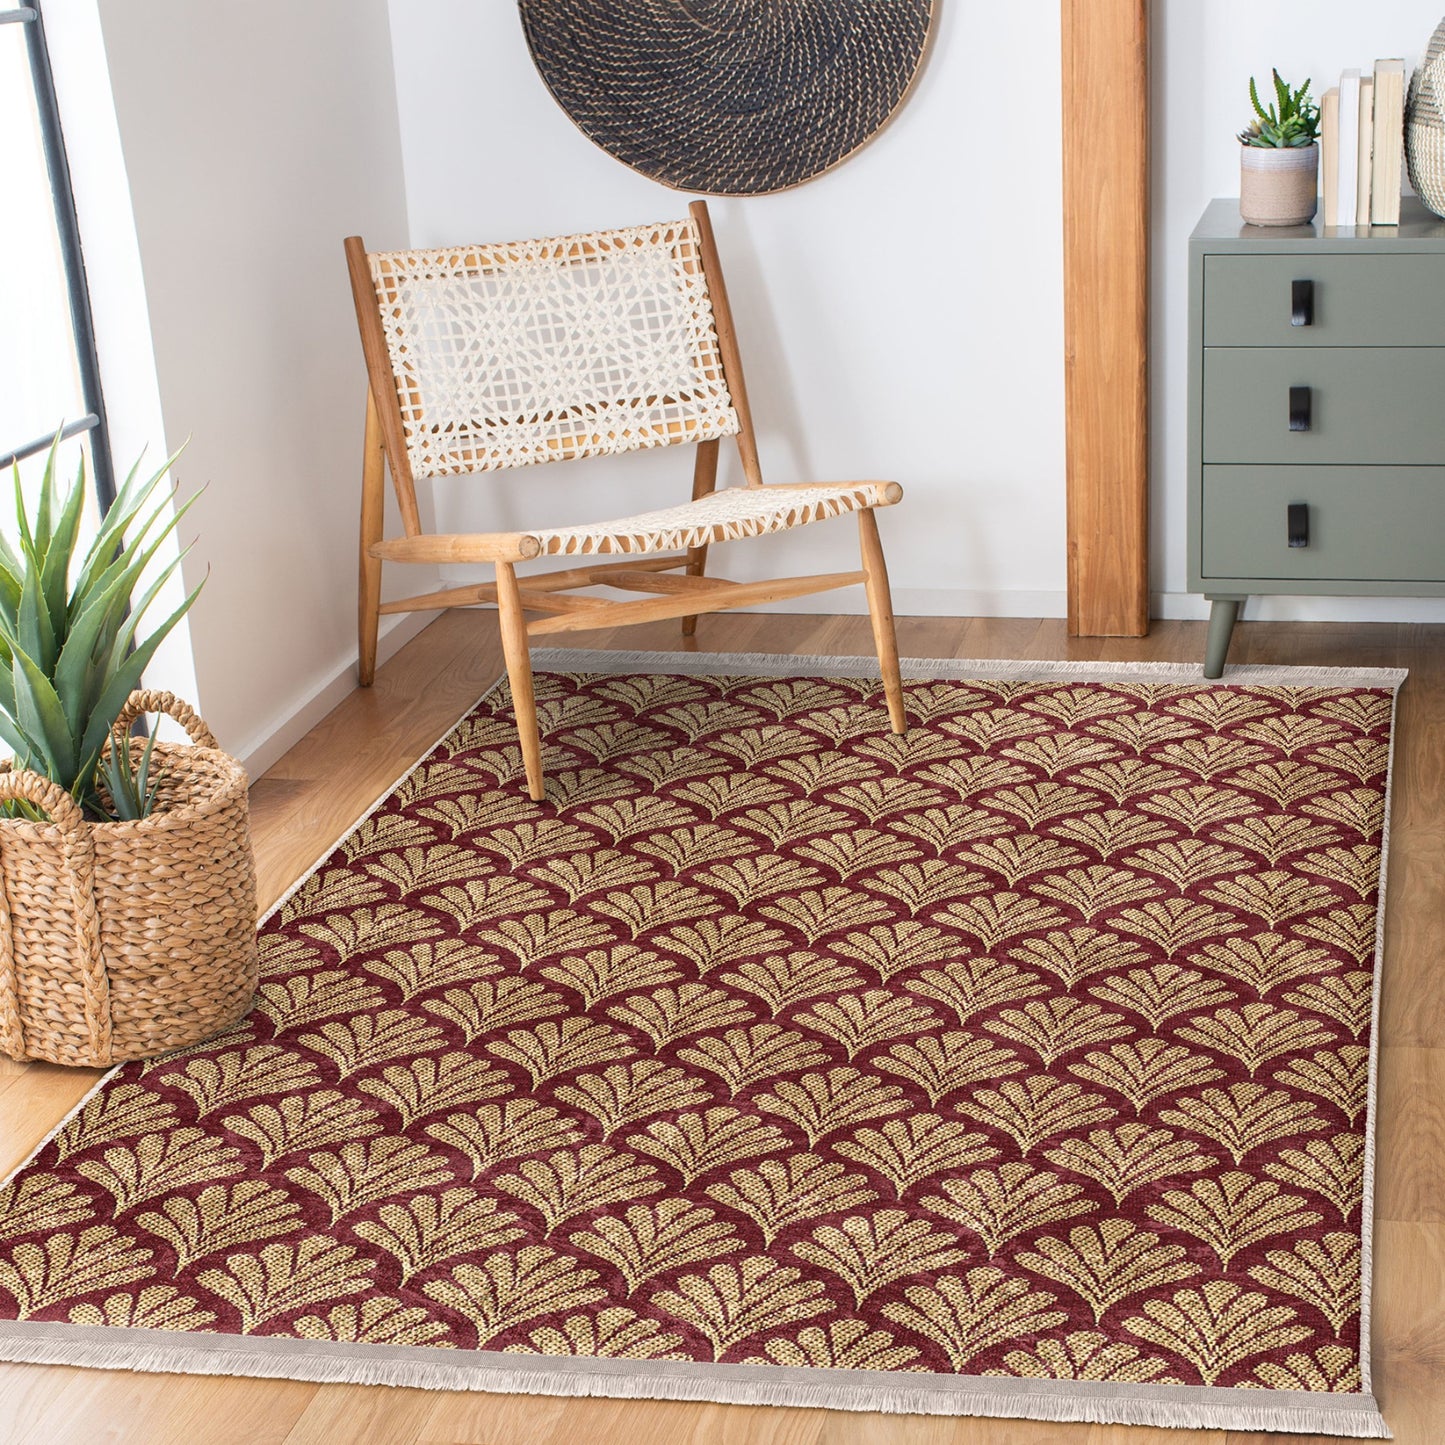 High-Quality Leaf Pattern and Gold Motif Rug for Exquisite Decor